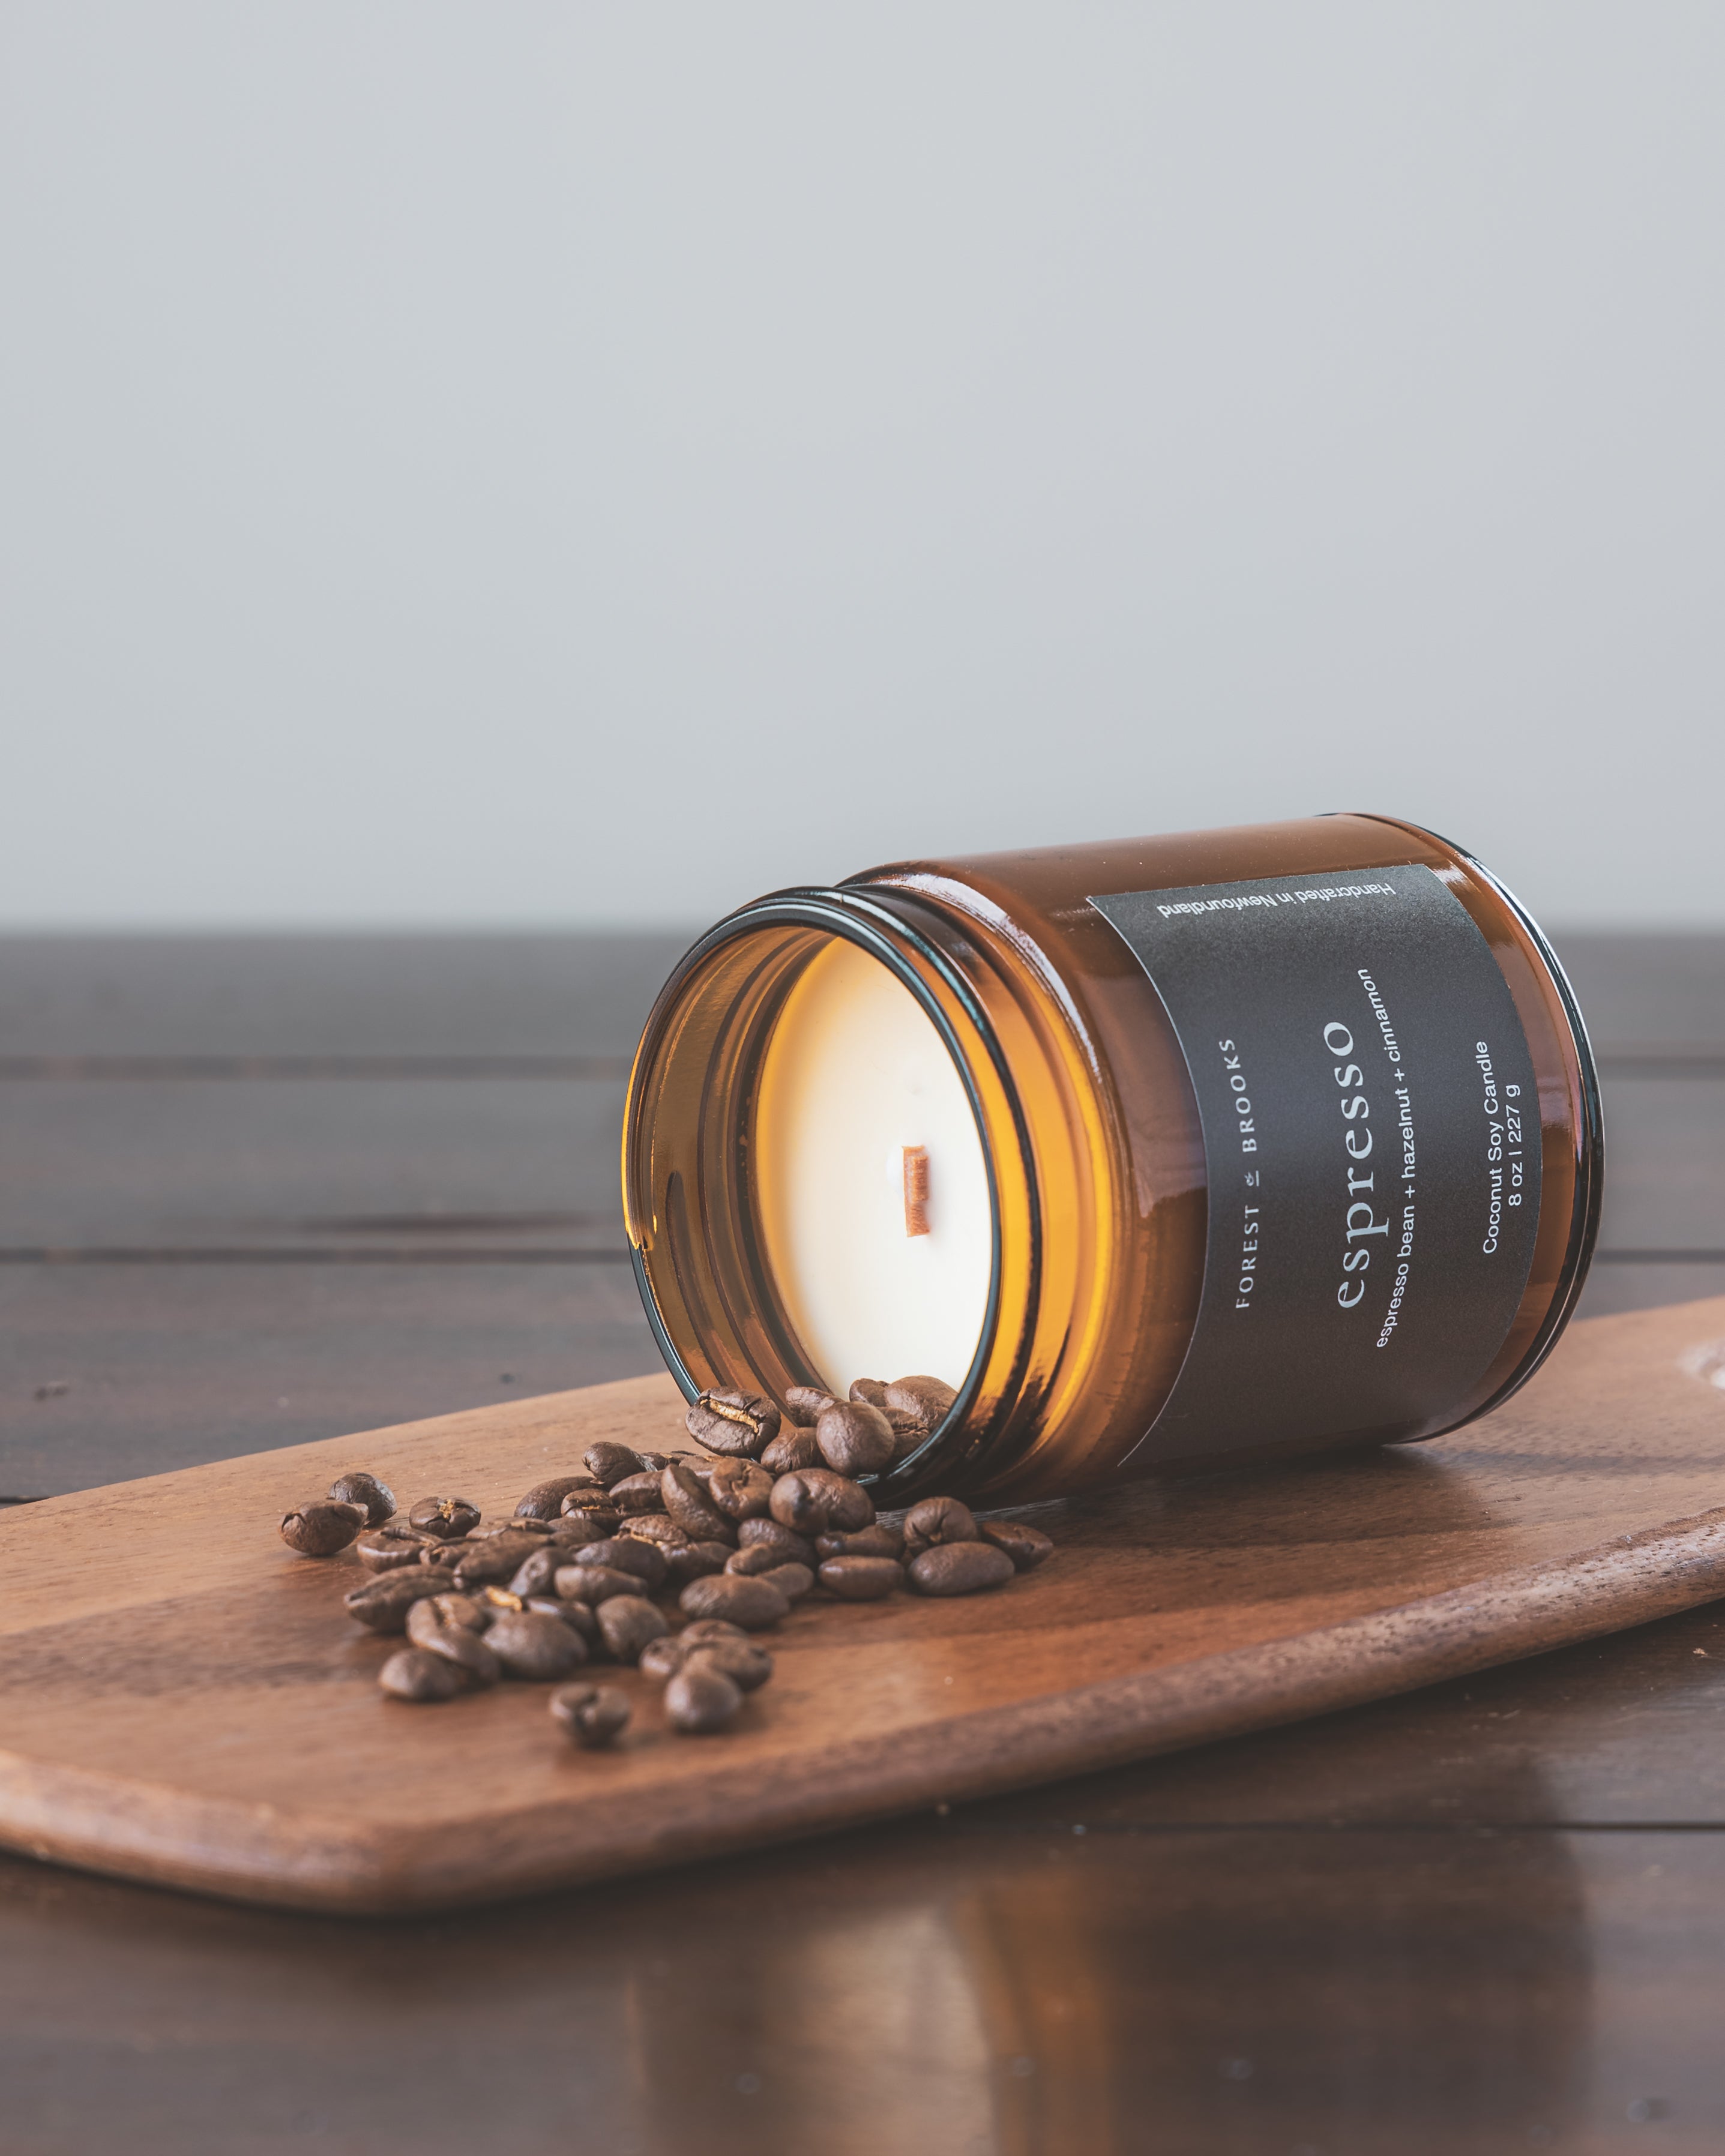 Forest & Brooks Candle